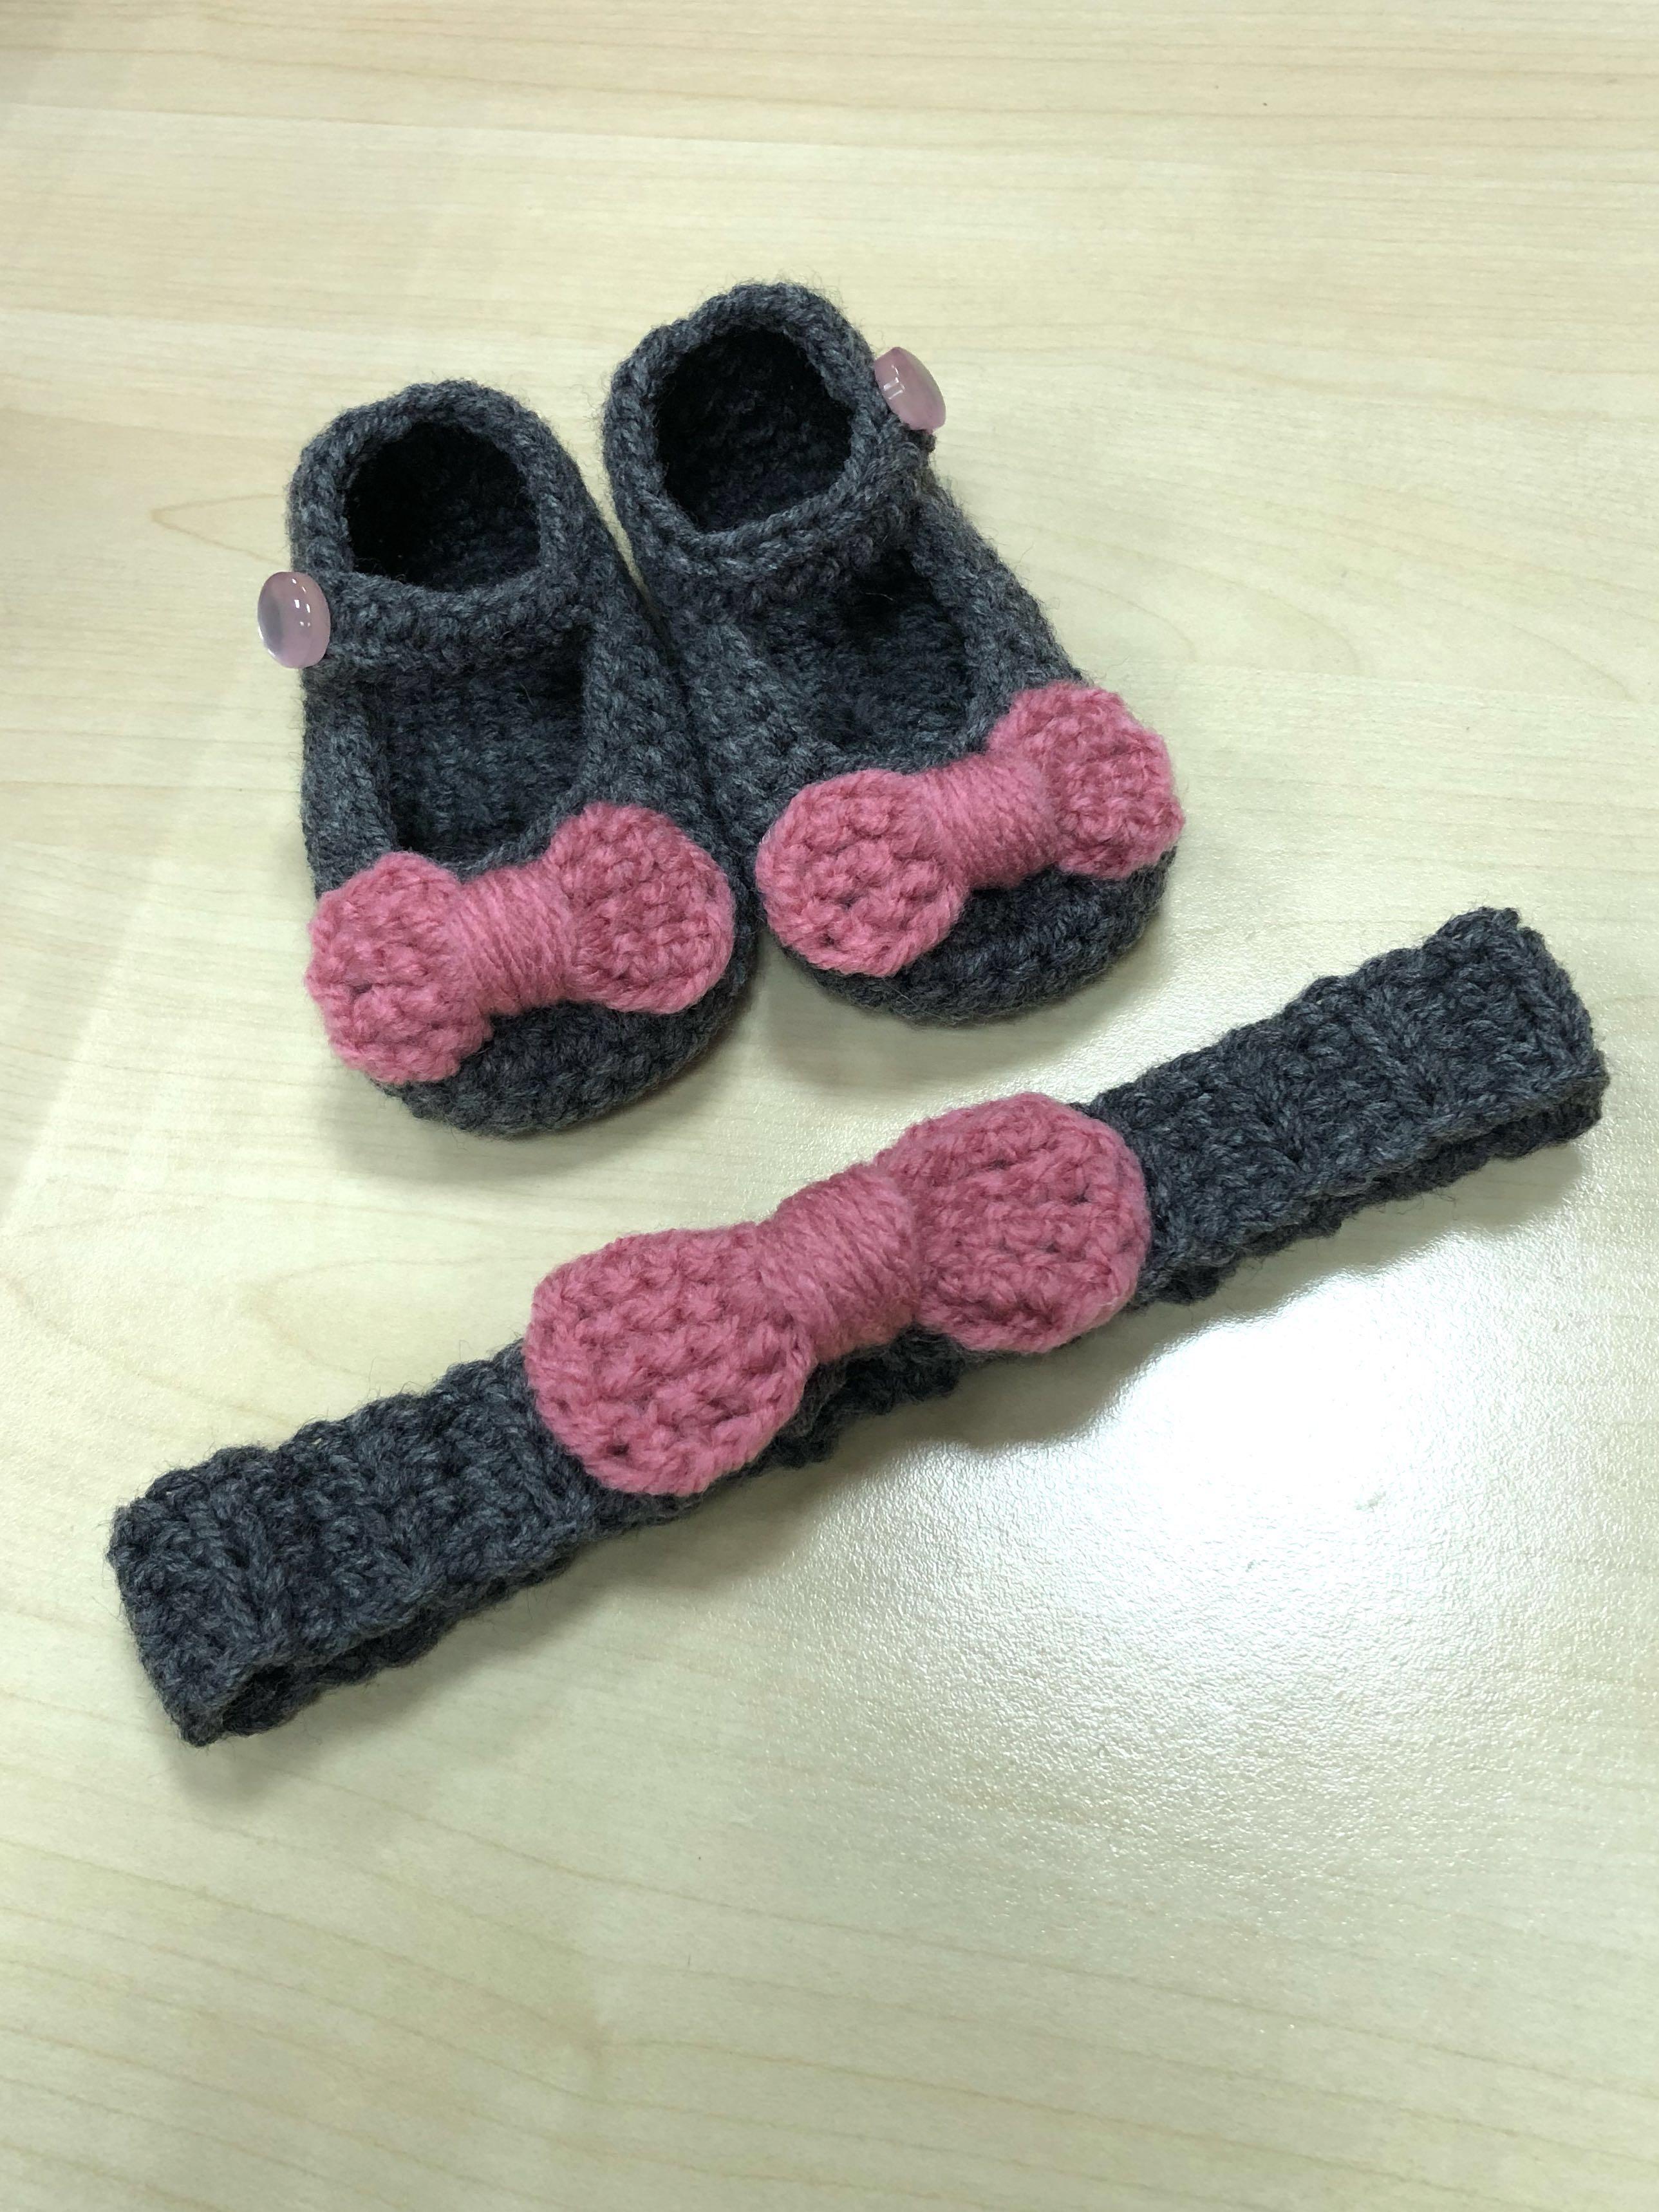 ankle shoes for babies